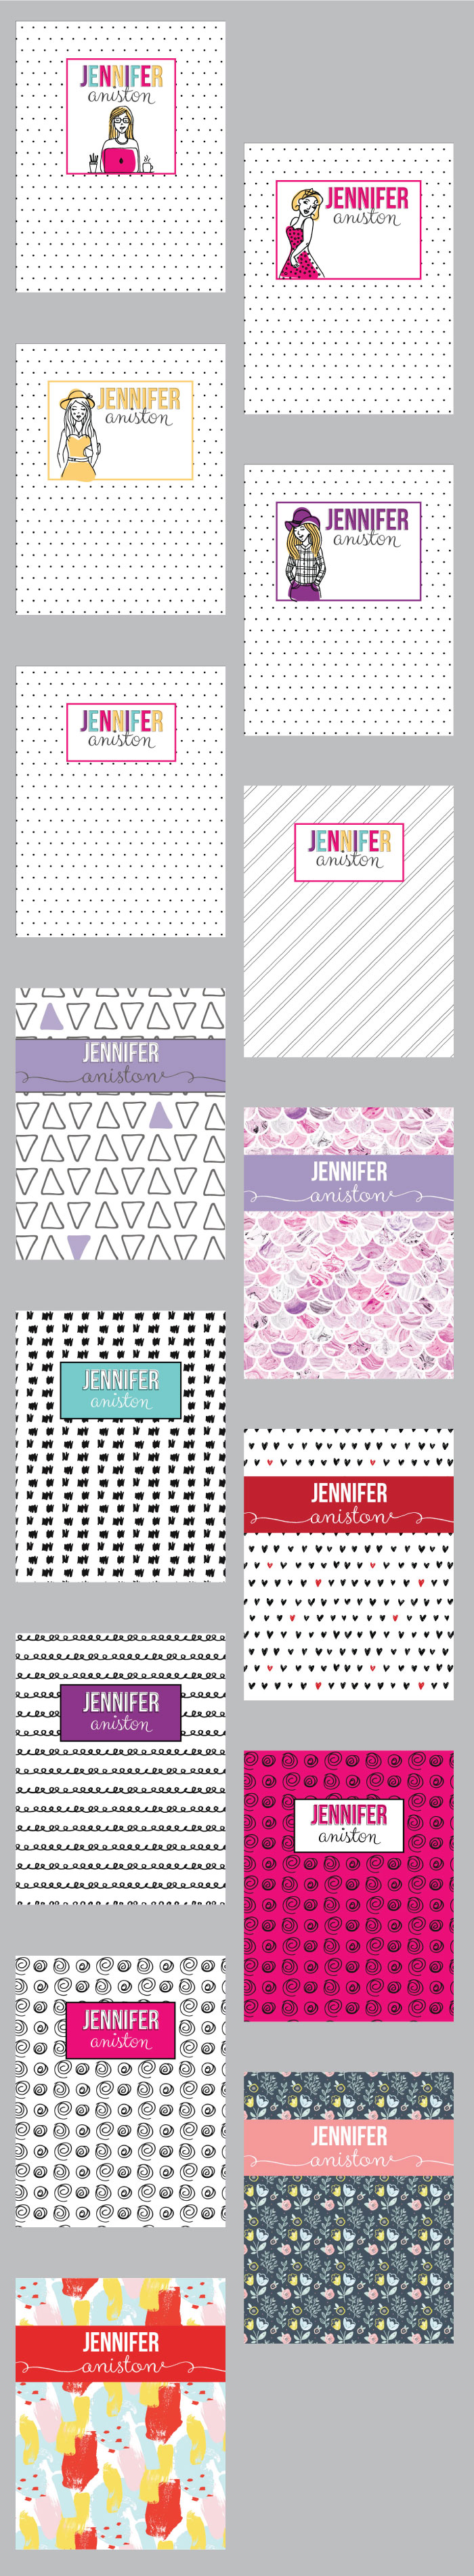 Custom Printable Planner Cover Pages! I love all this colorful cover pages for your notebook, binder, or planner.